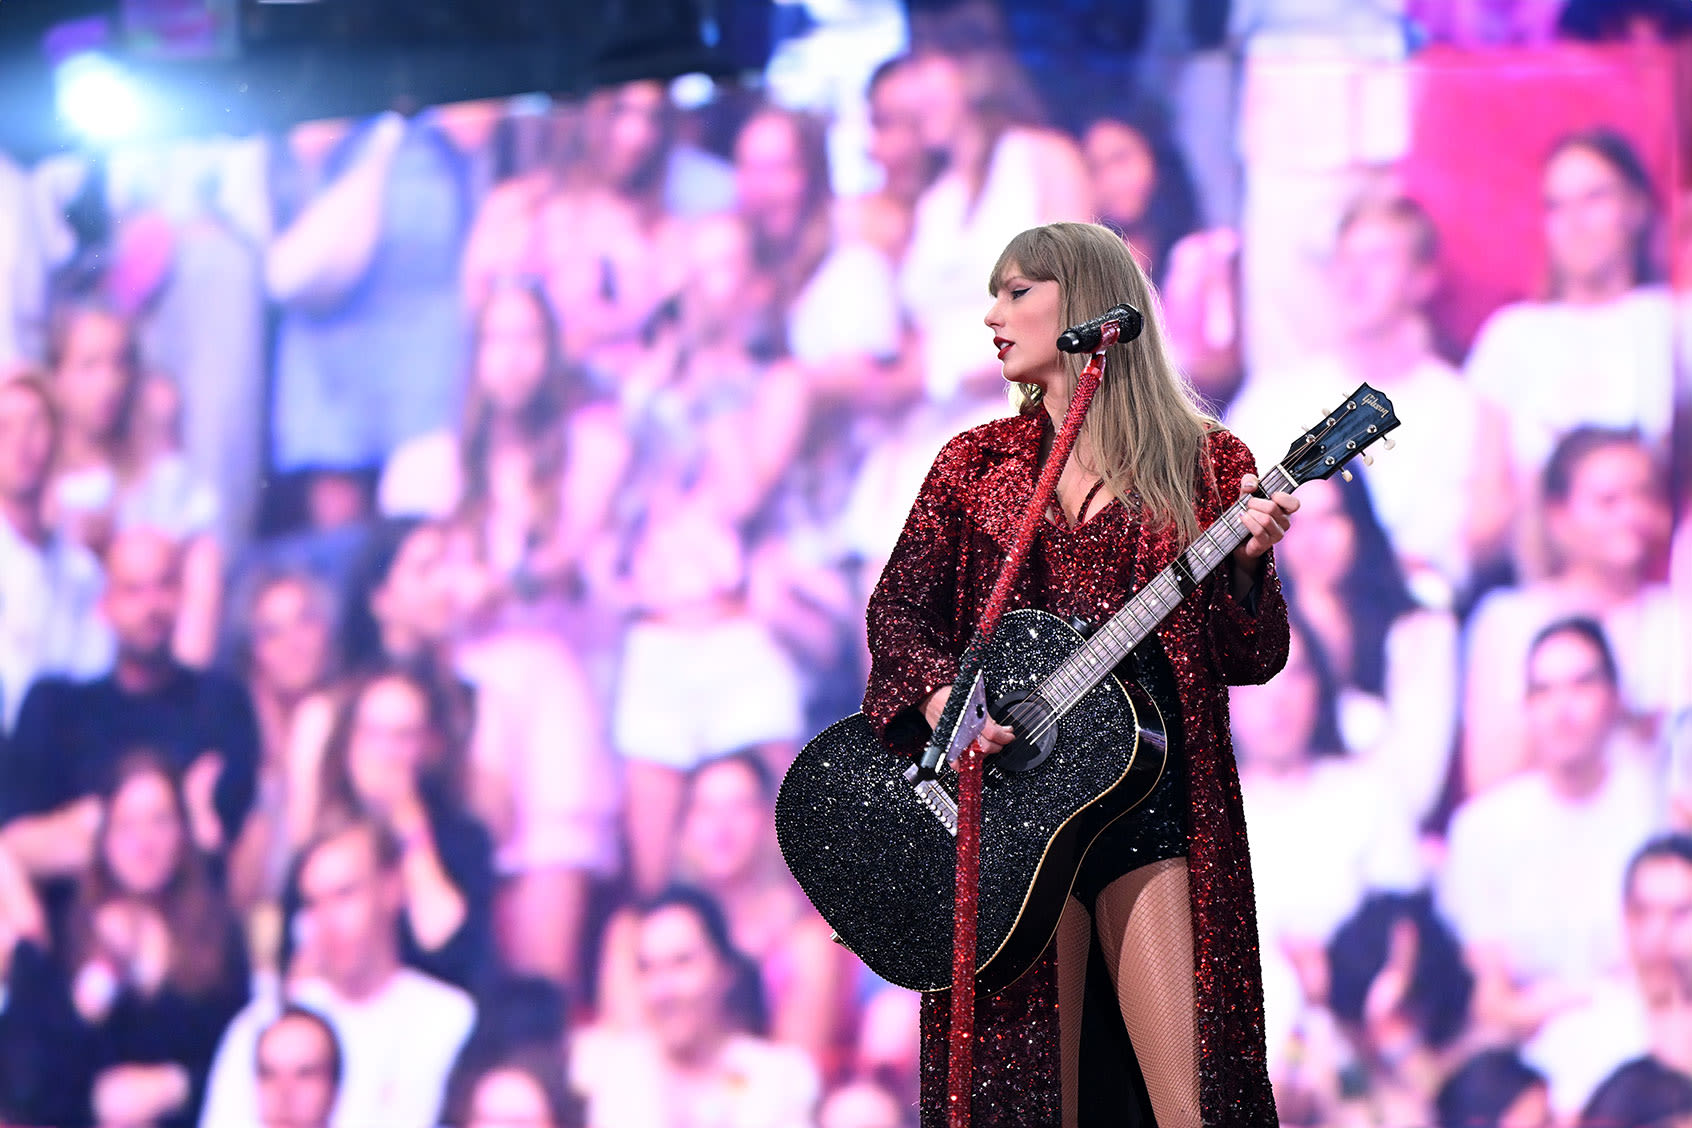 Worried Dems pitch "blitz primary" plan suggesting Taylor Swift moderate forum to replace Joe Biden